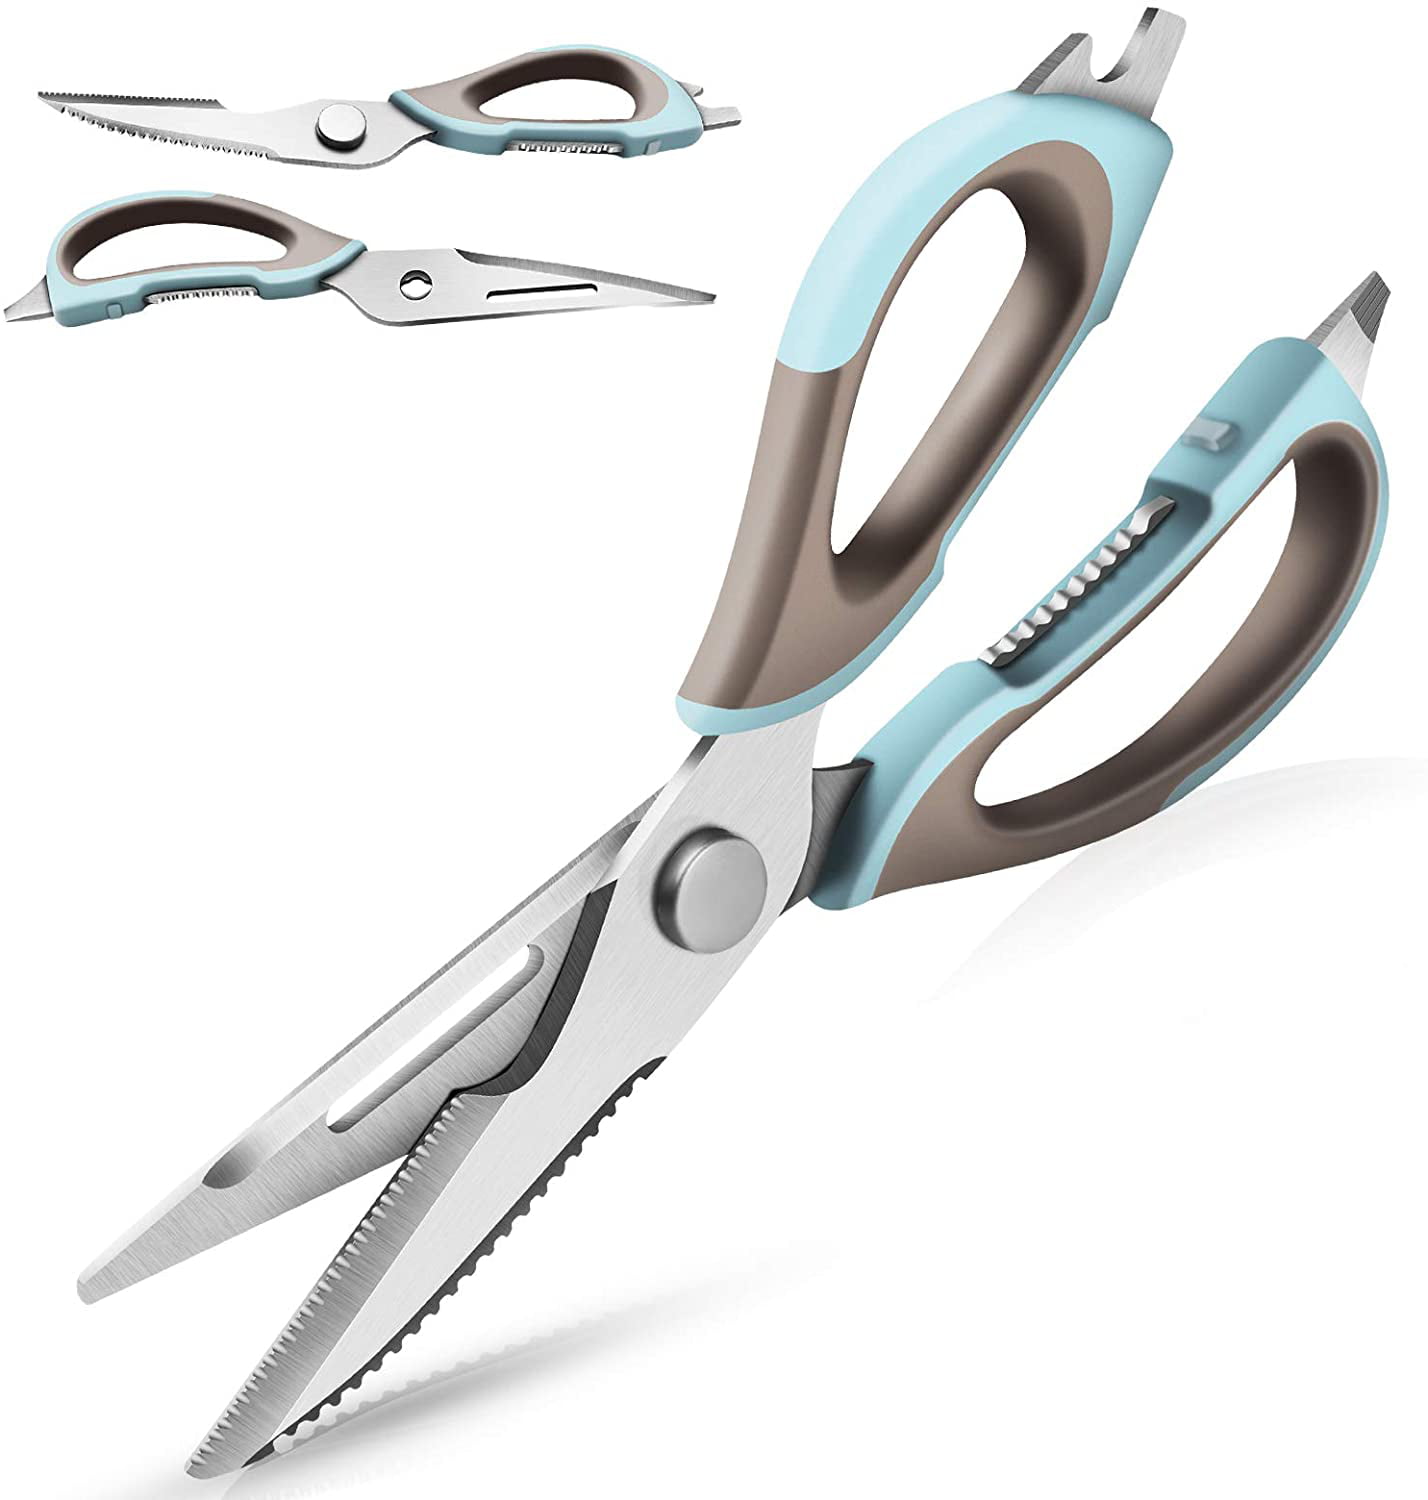 Multifunction Kitchen Food Scissors, Detachable Stainless Steel Heavy Duty  Culinary Scissors, 7-in-1 Household Shears with Magnetic Holder, for Cut